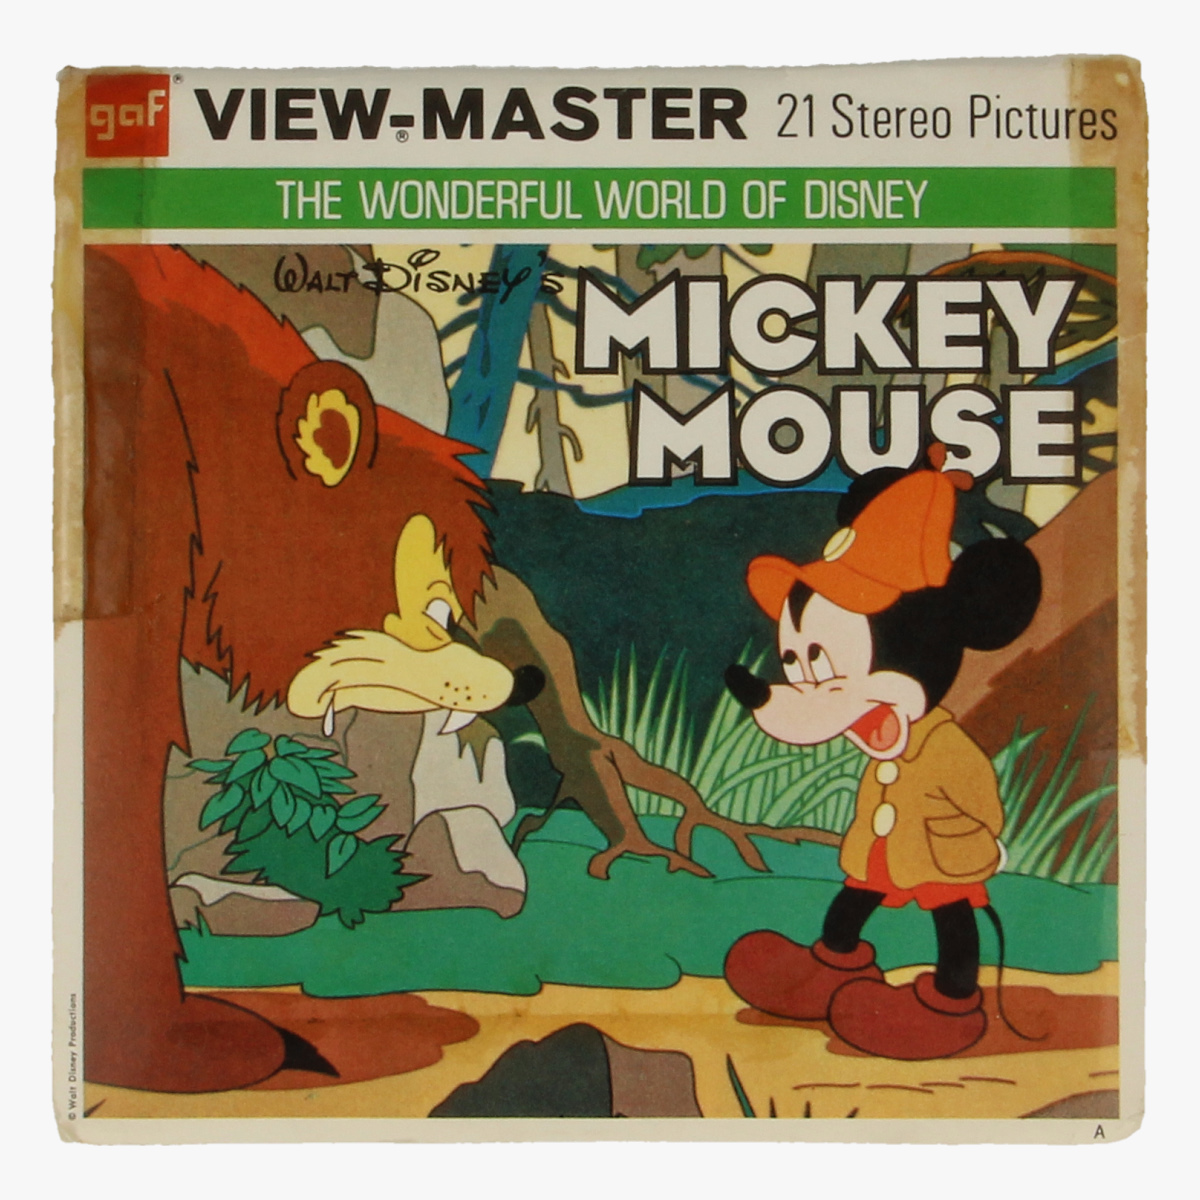 Afbeeldingen van View-master Mickey Mouse: The brave little tailor, Pluto, the pointer, the Toy shop